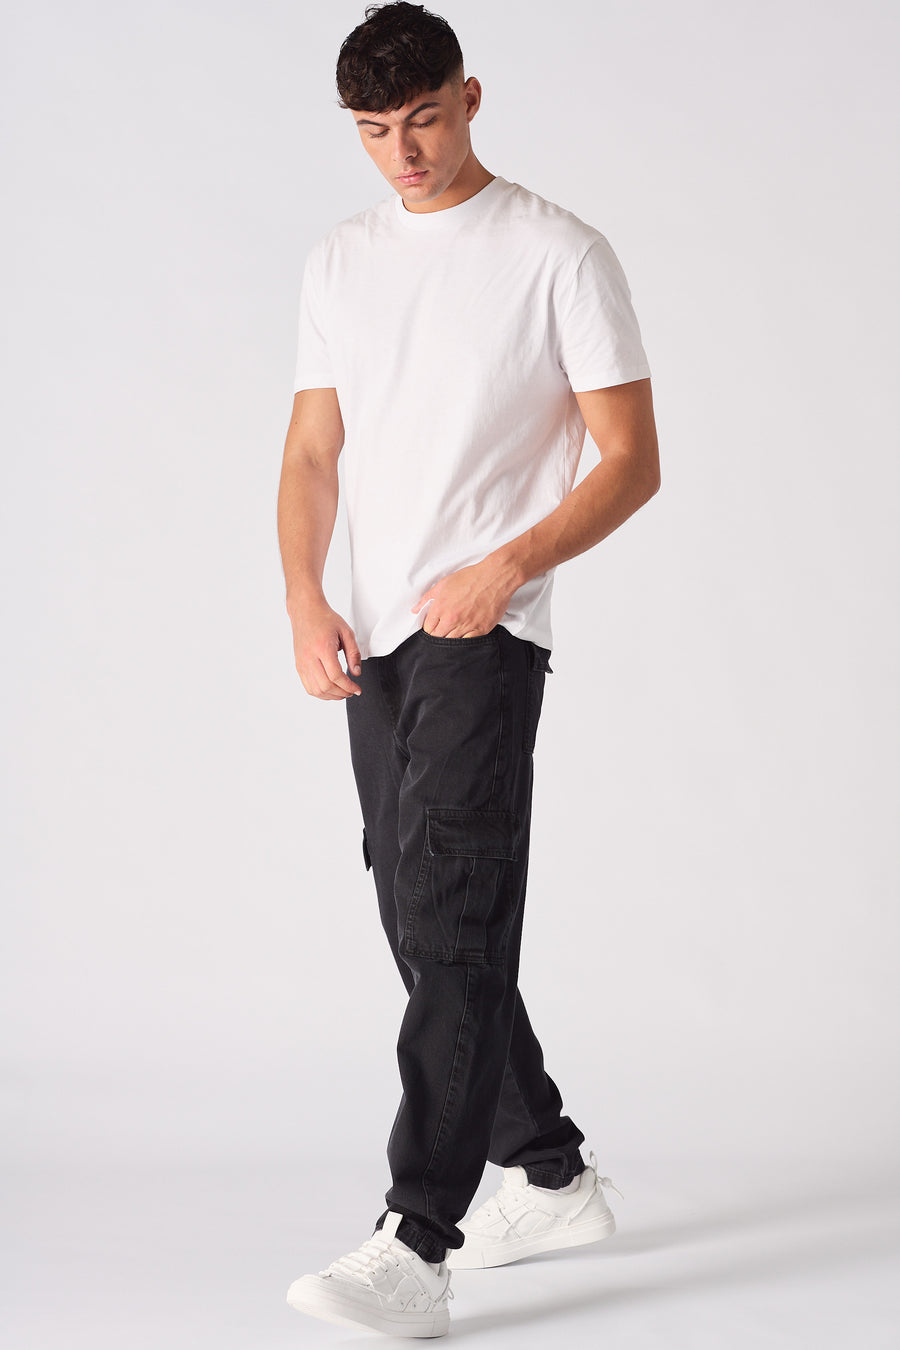 RELAXED FIT CARGO JEANS - BLACK